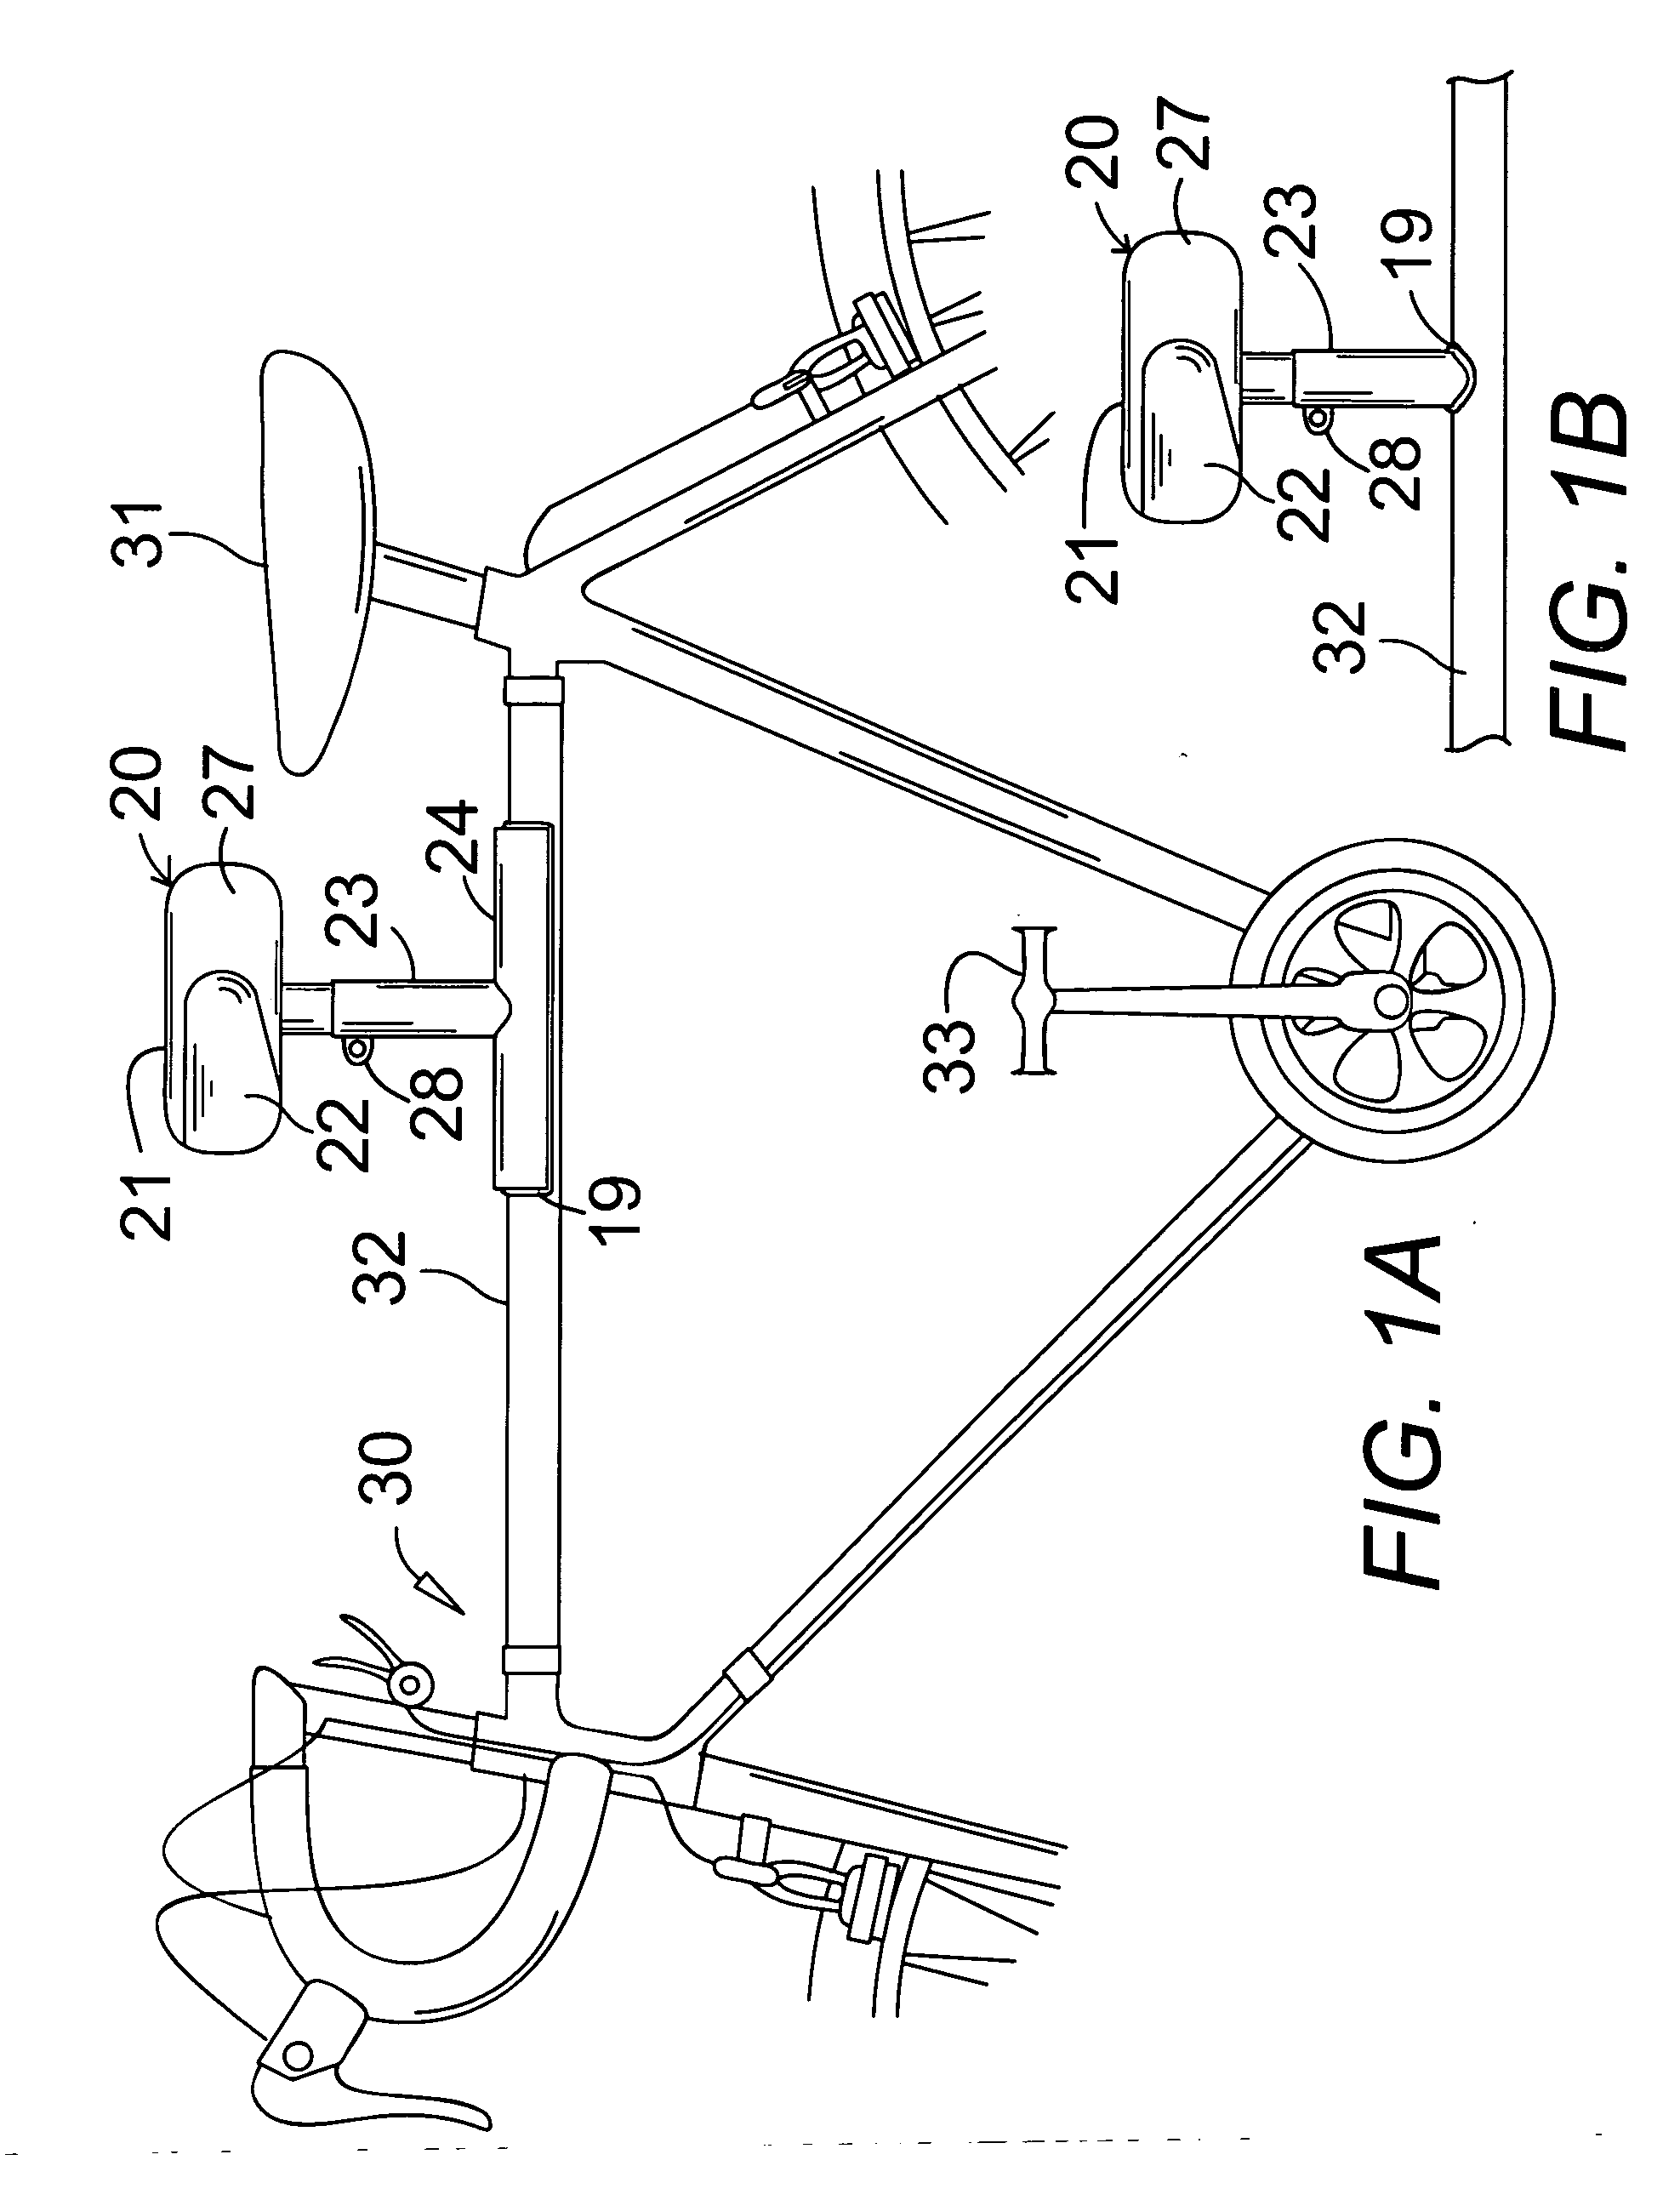 Auxiliary bicycle seat for stand-up uphill pedaling support